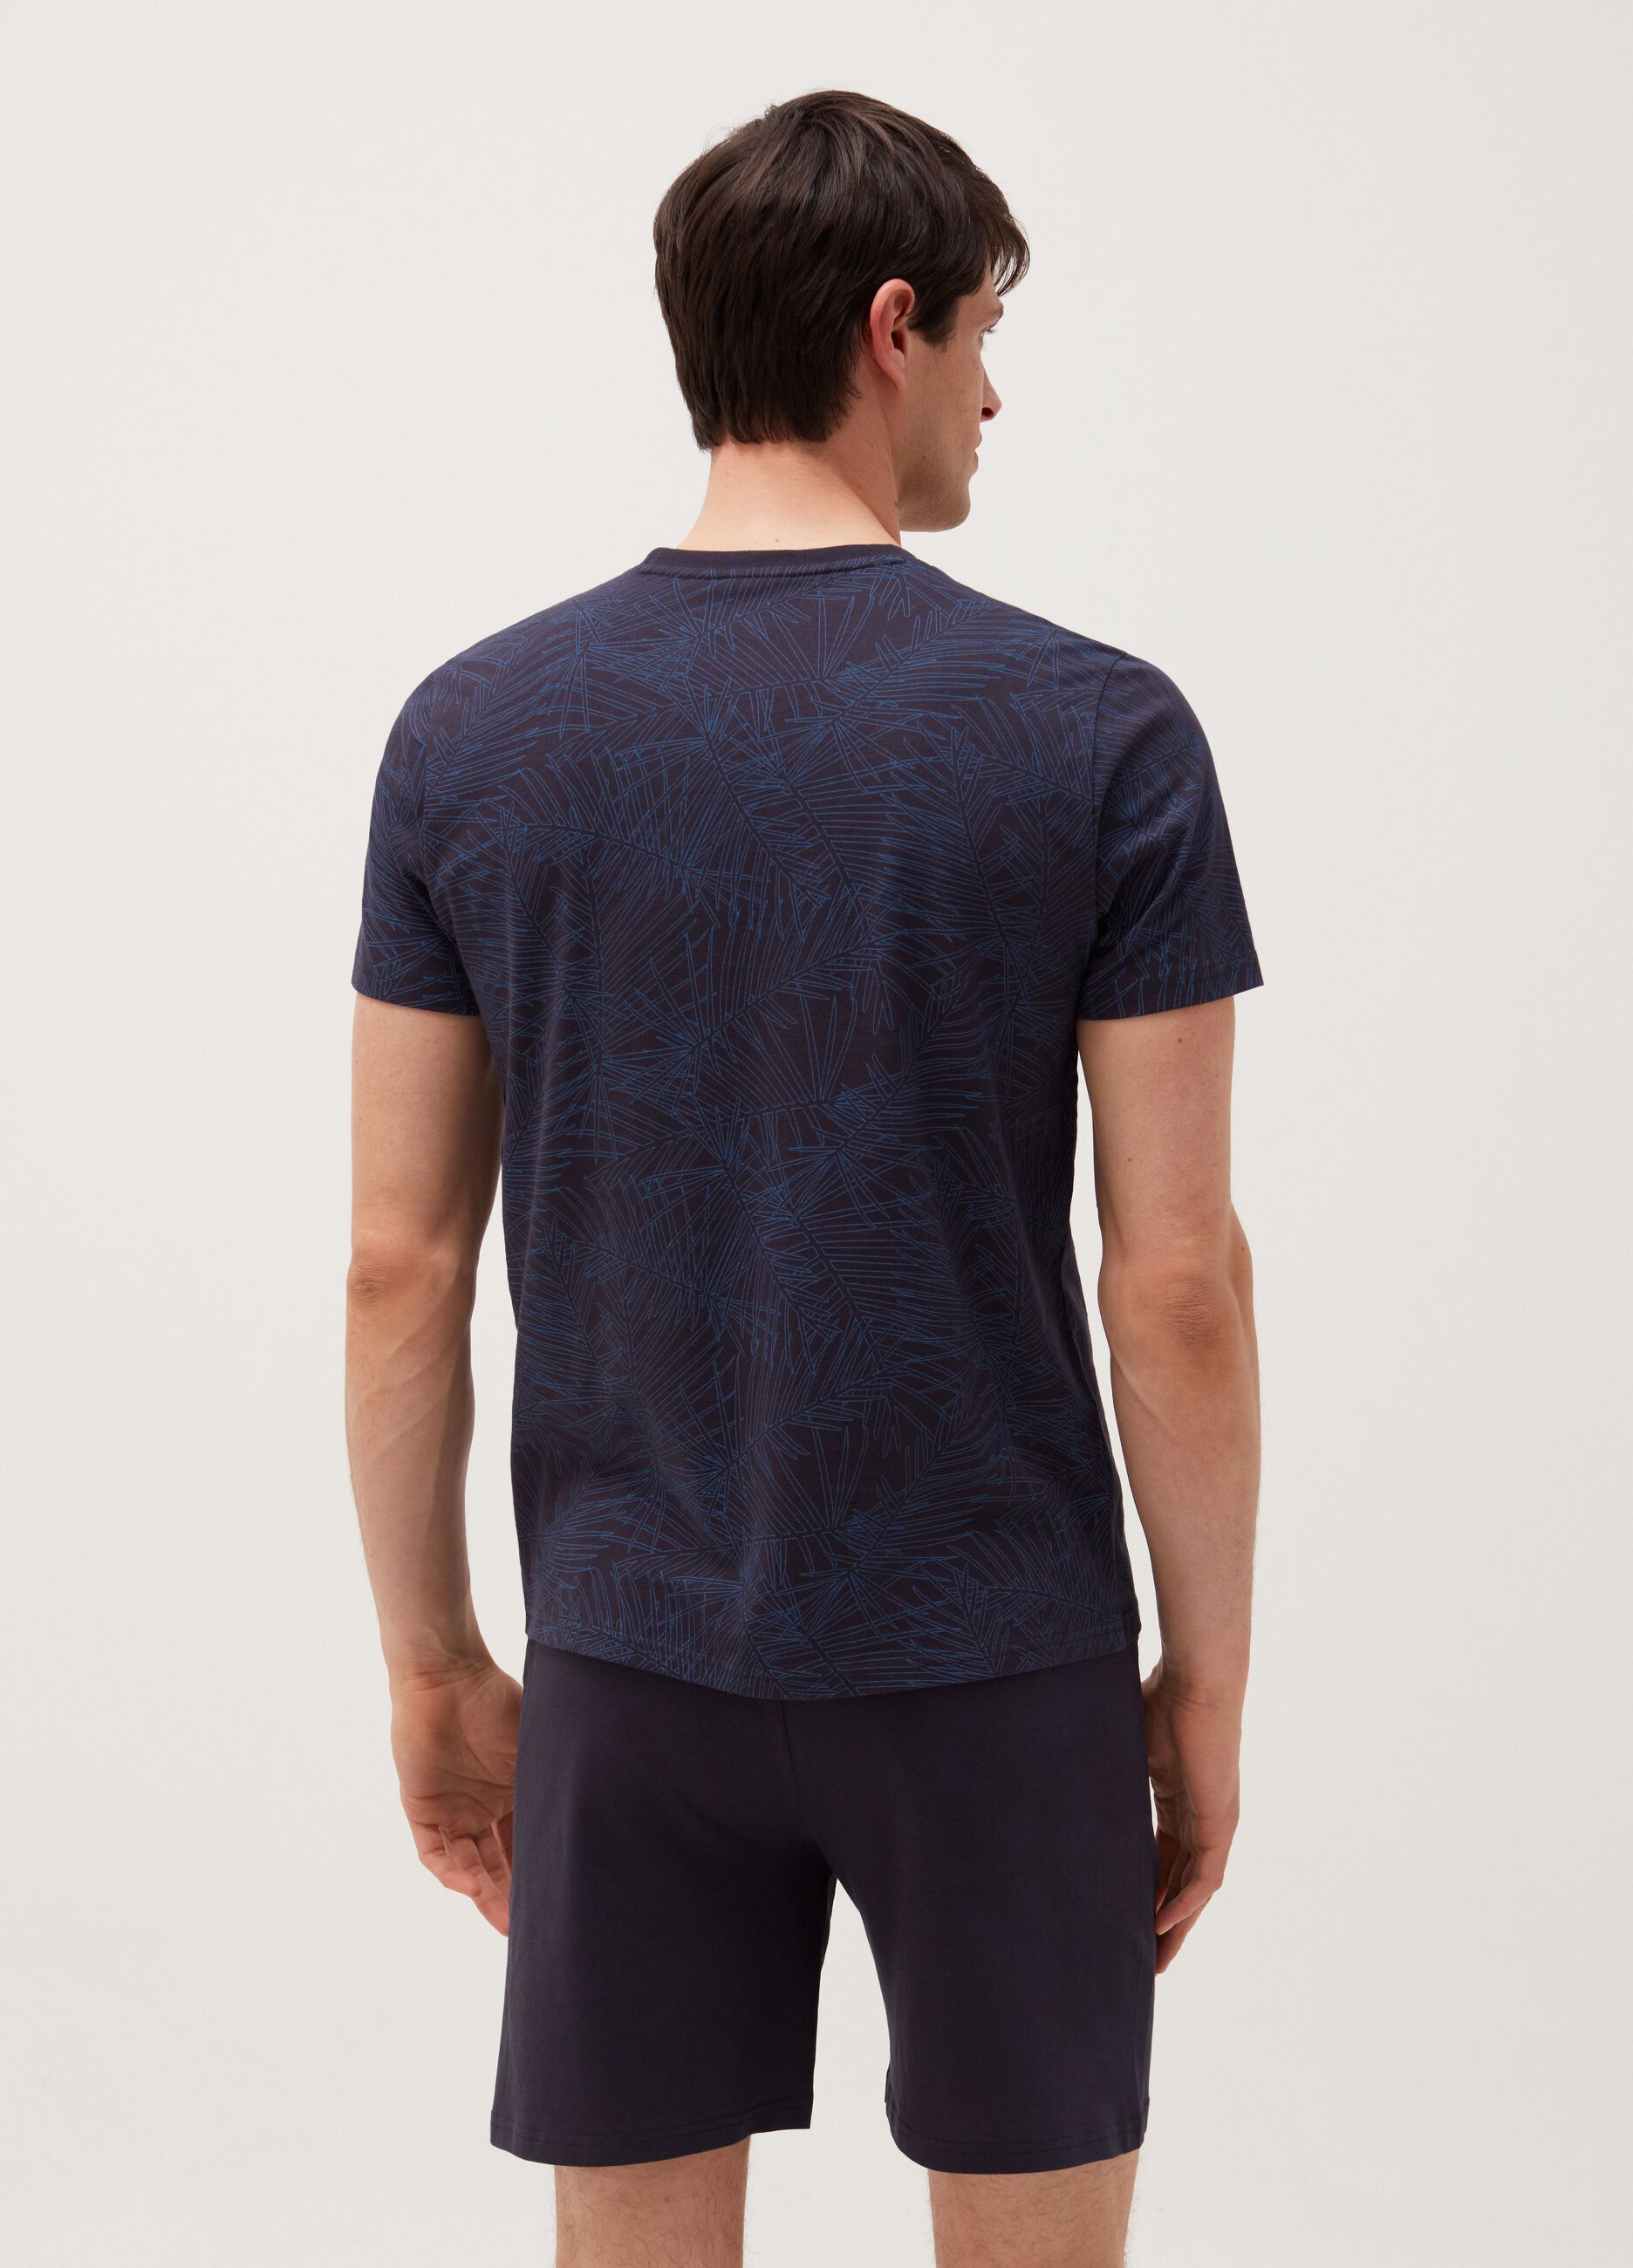 Short pyjamas with round-neck patterned top